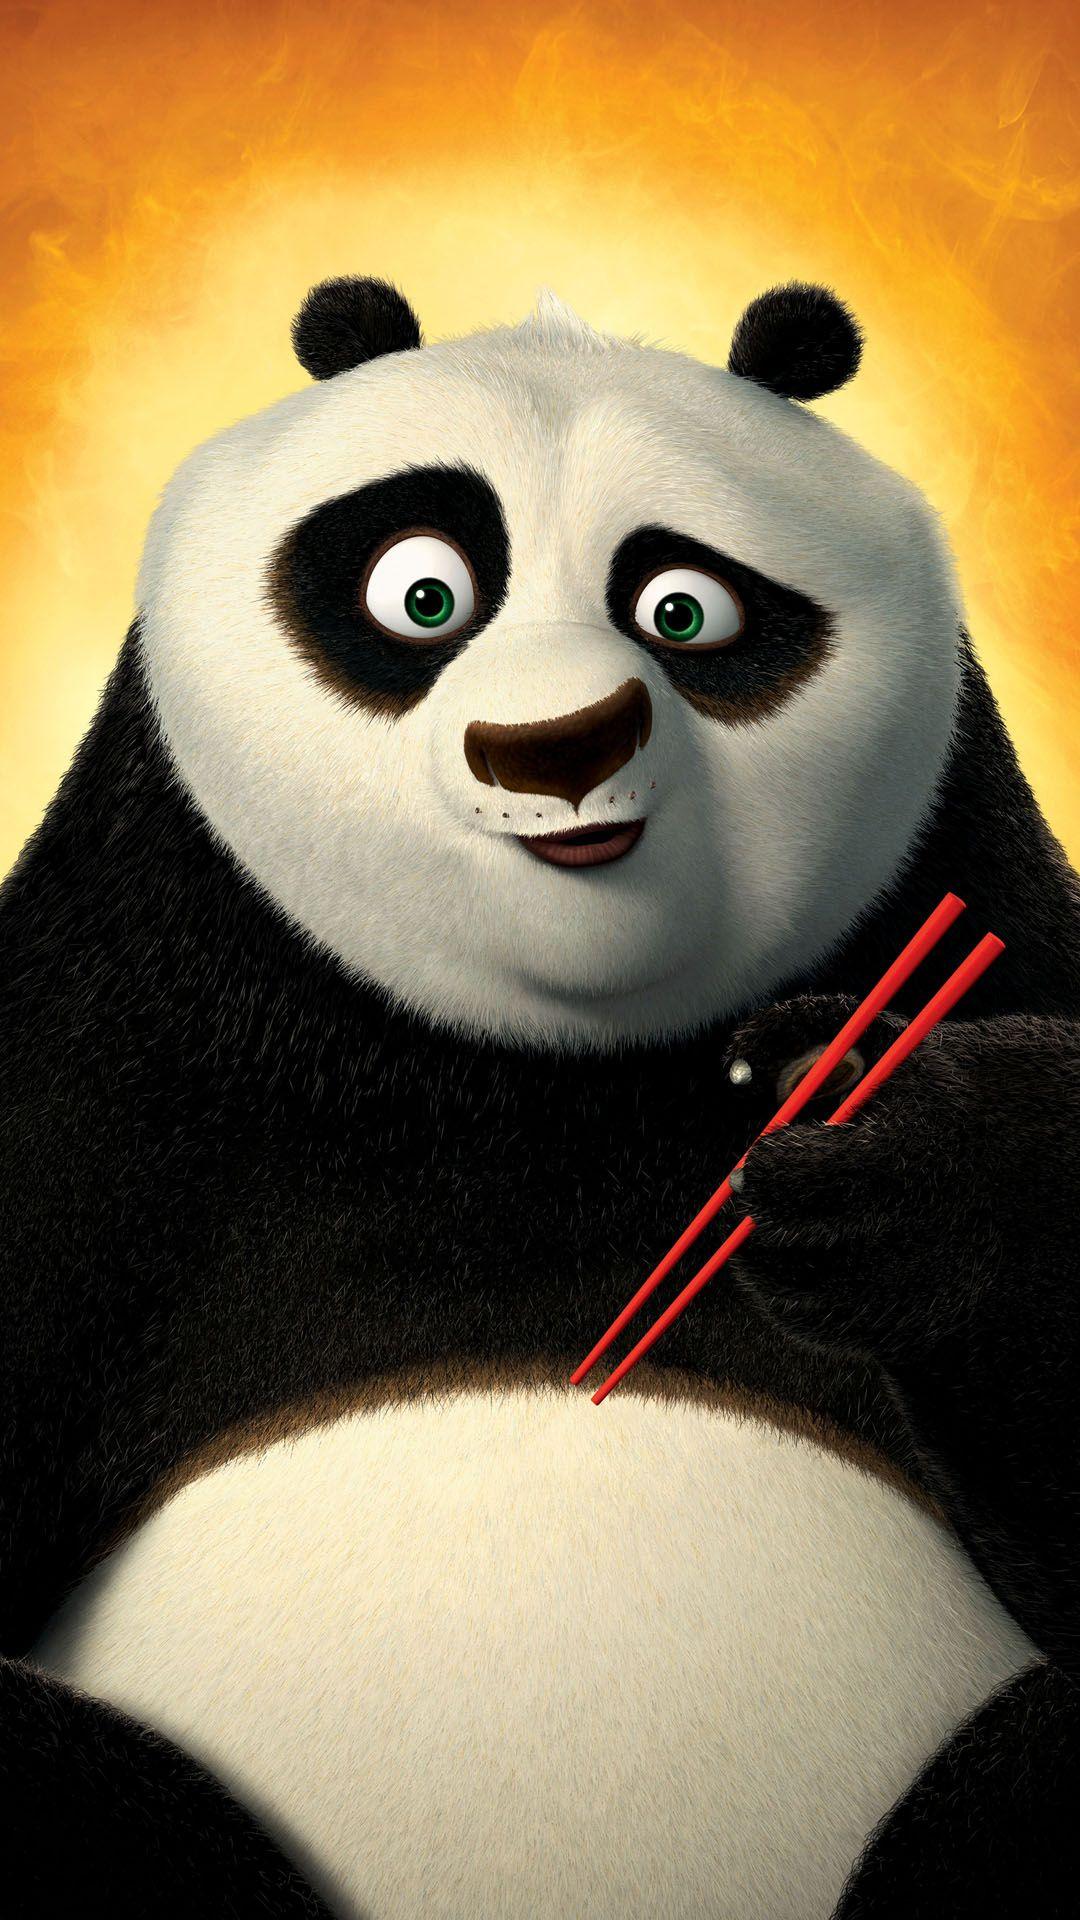 Kung Fu Panda 2 htc one wallpaper, free and easy to download